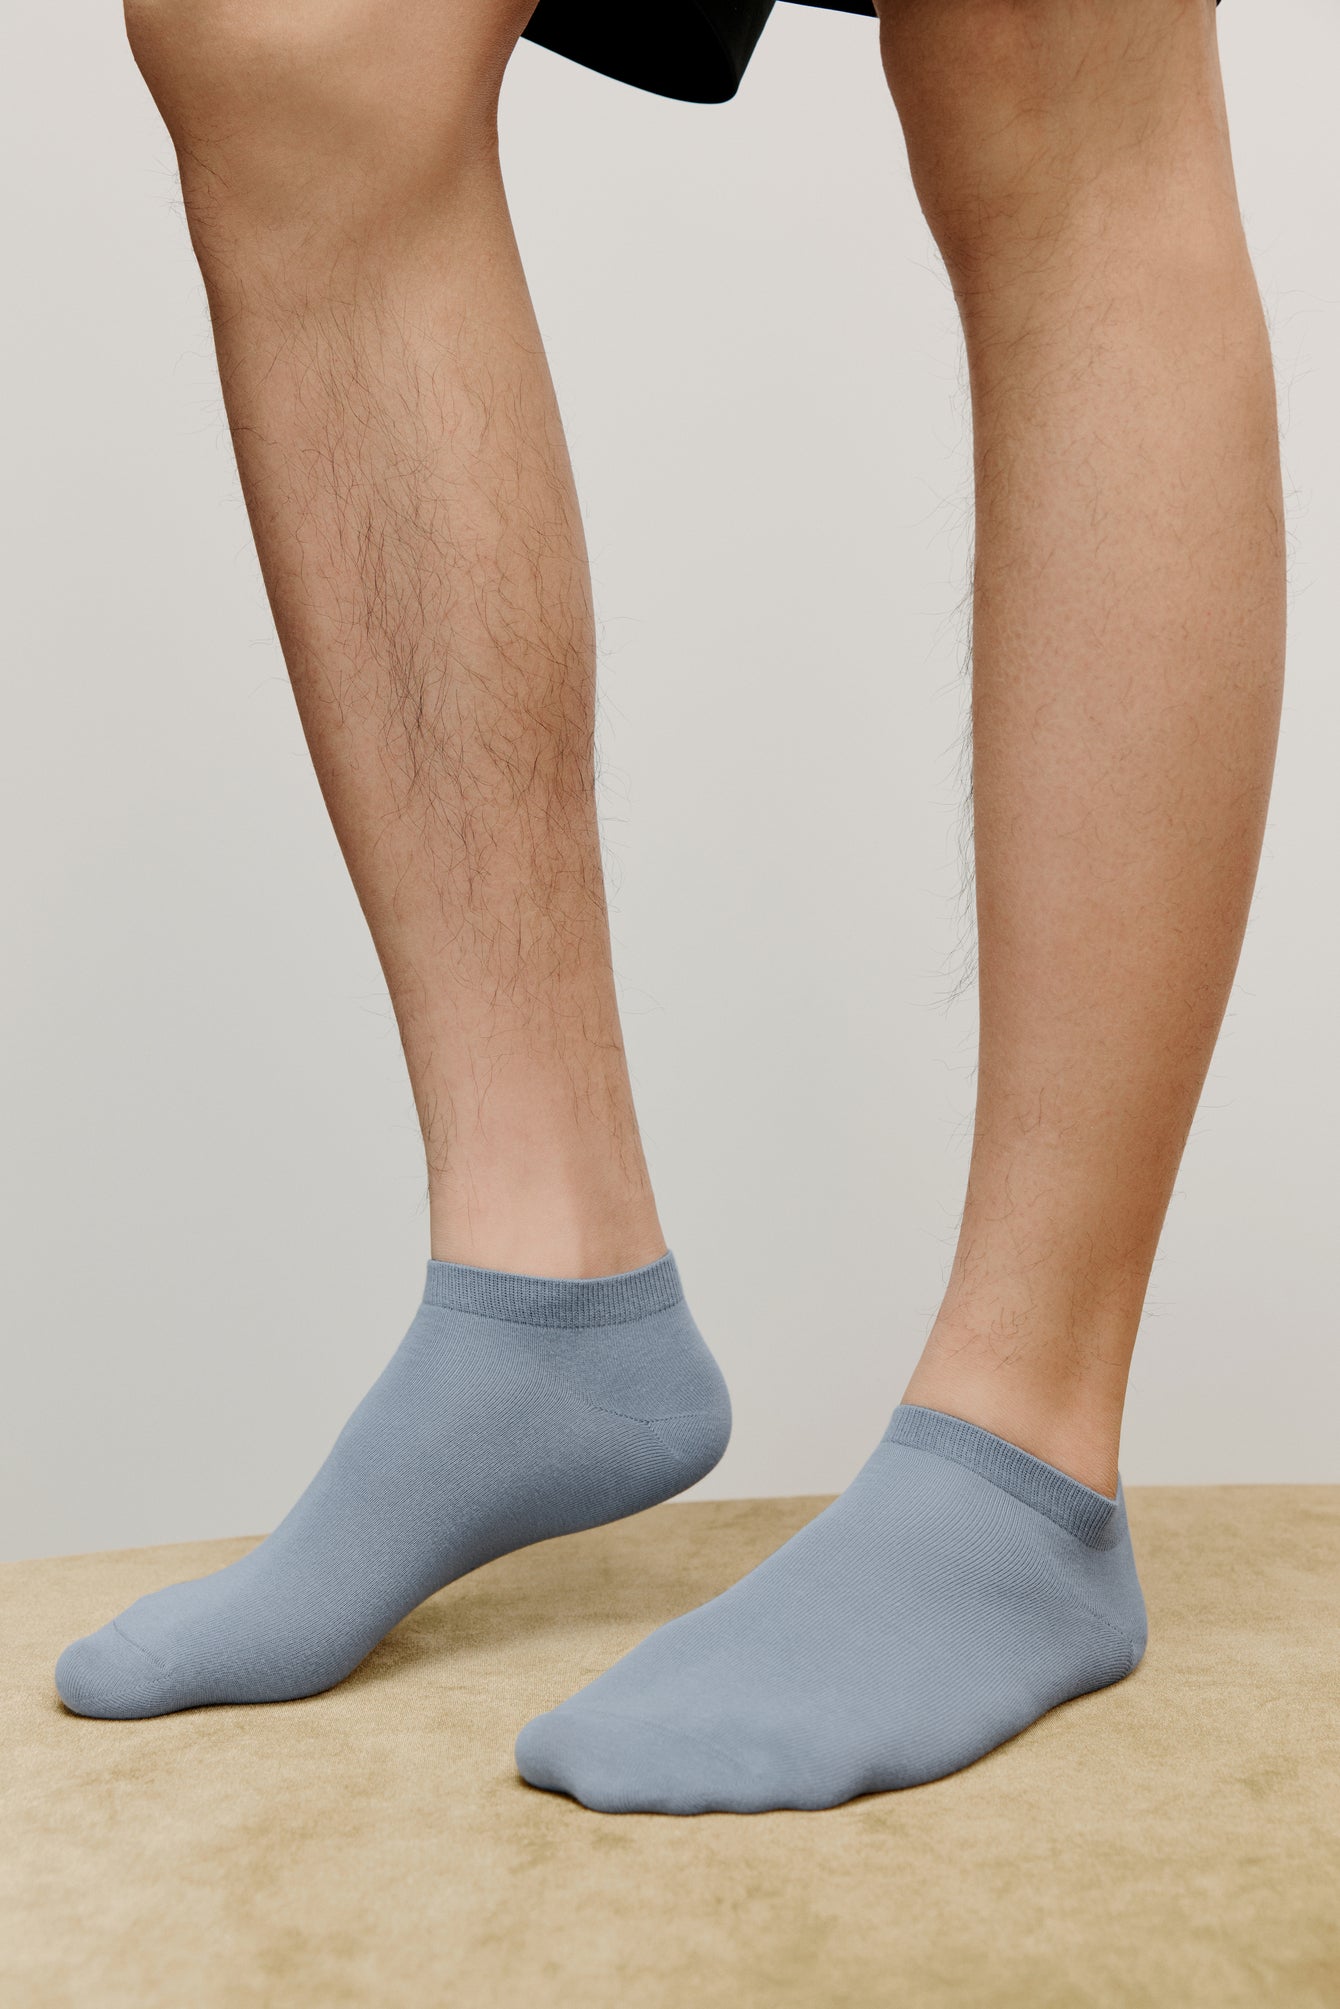 a person wearing blue ankle socks